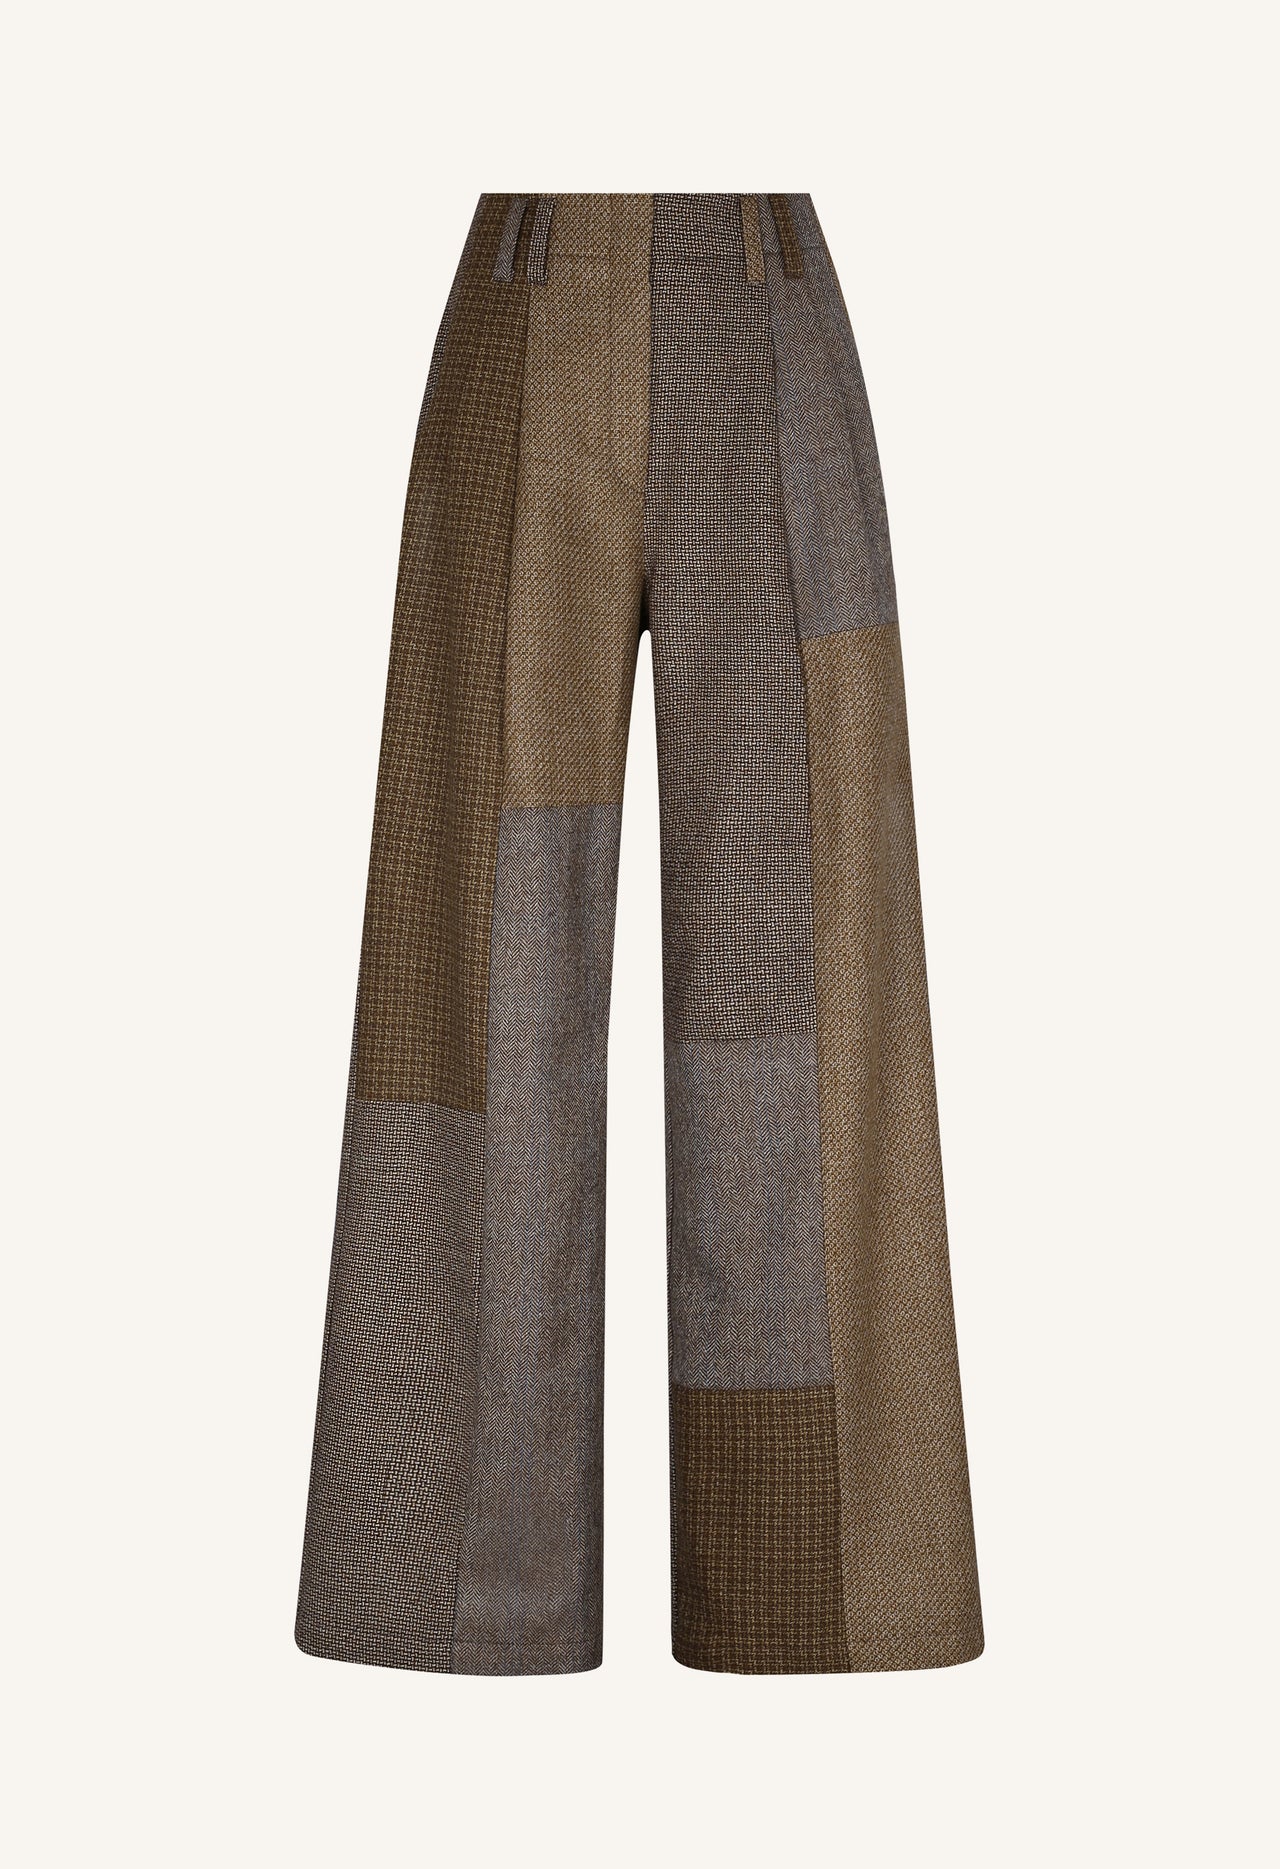 Guadalupe Trousers in Tostada Patchwork Merino Wool